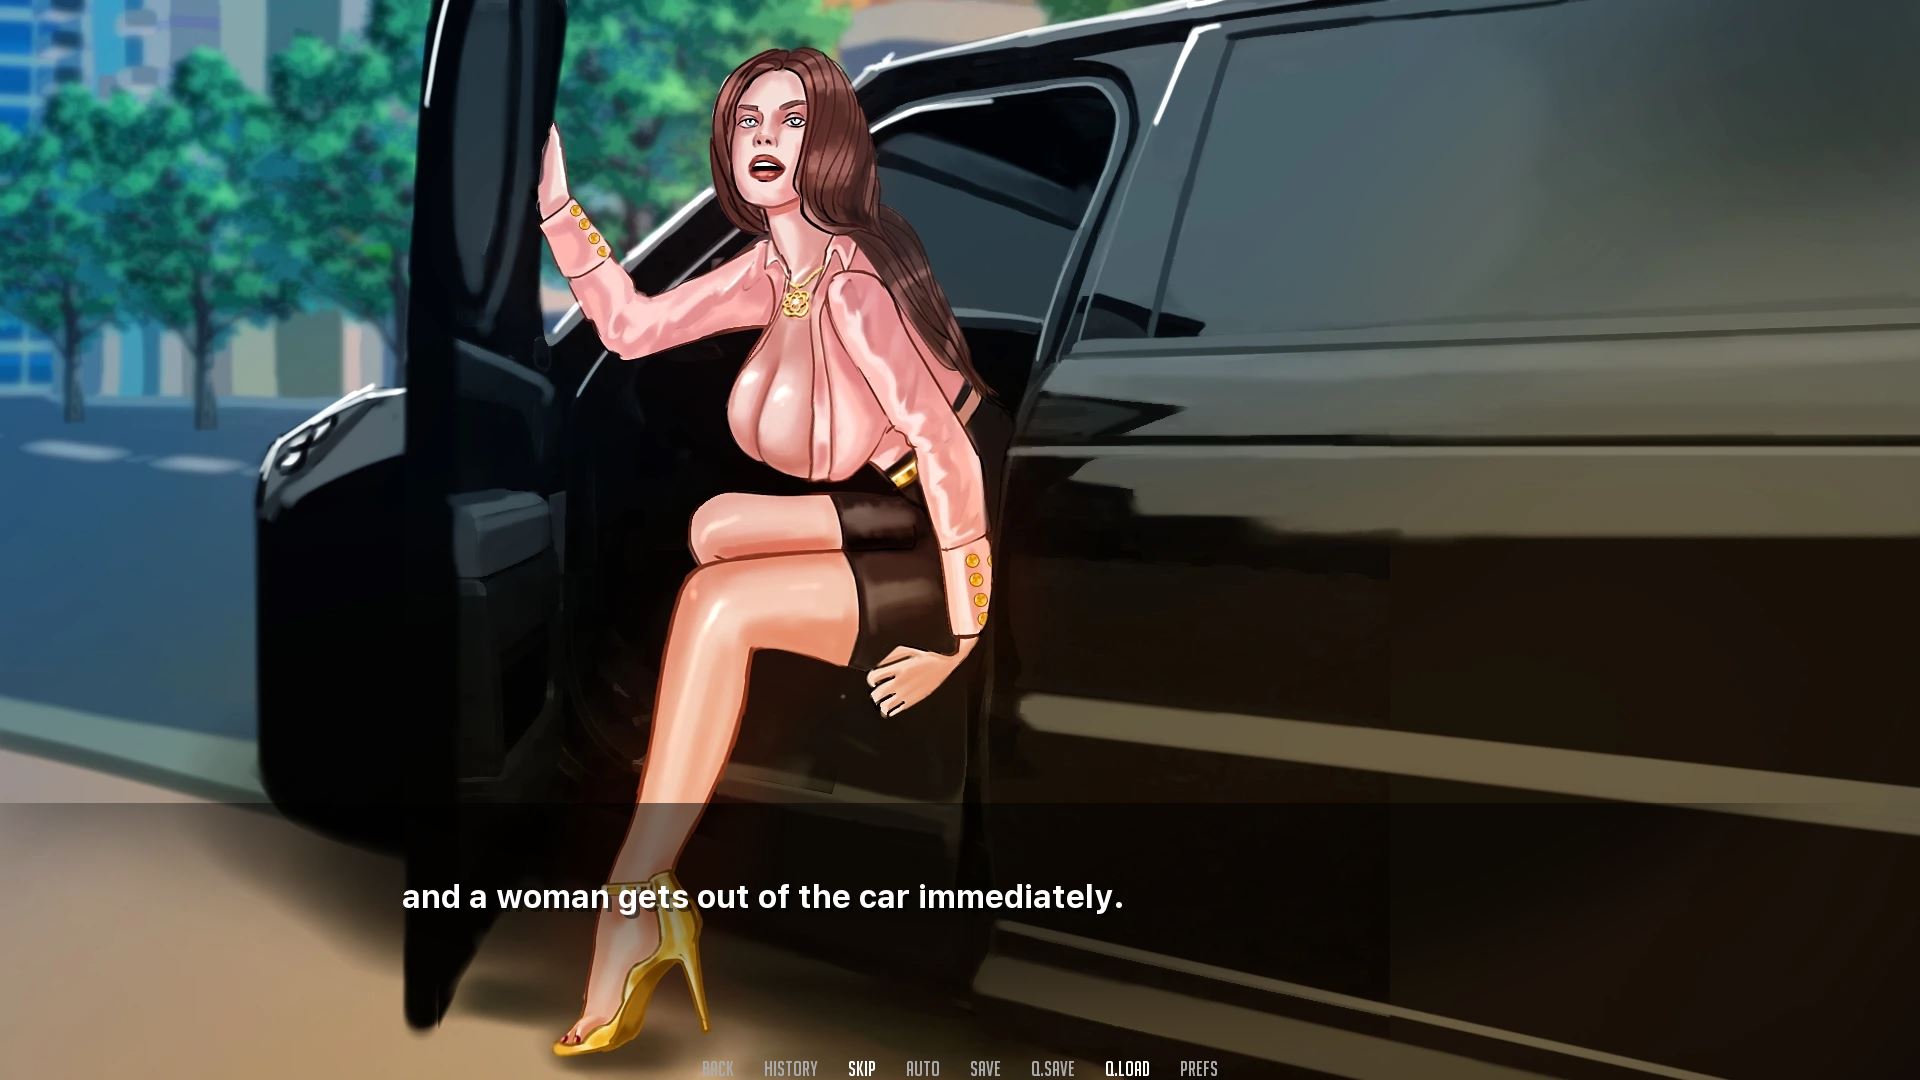 Ice Car Interracial Porn - The Icebreaker Ren'Py Porn Sex Game v.0.3.2 Download for Windows, MacOS,  Linux, Android